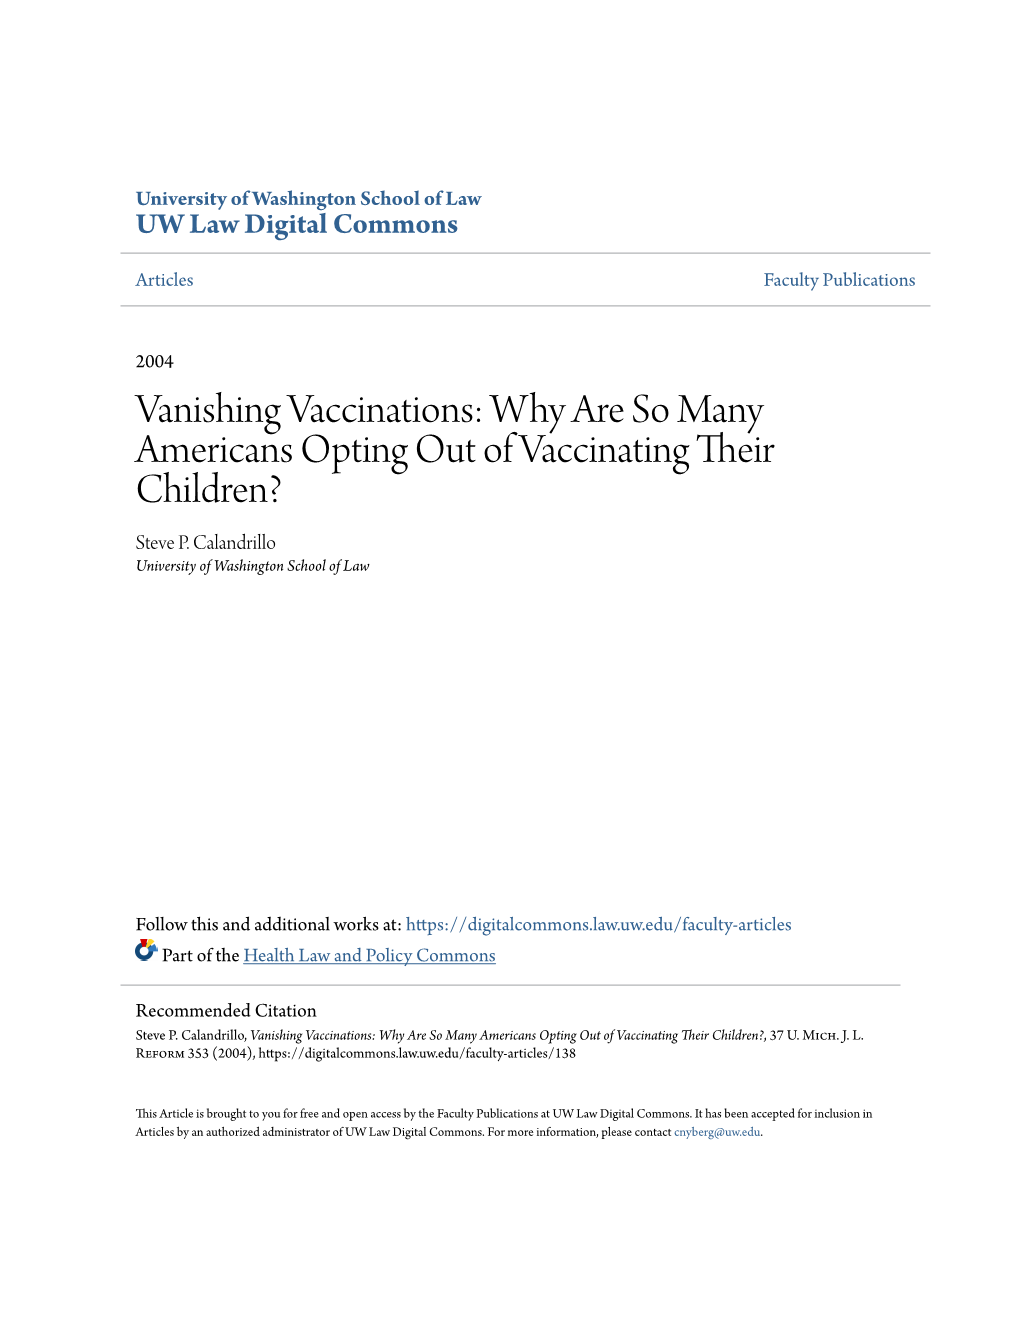 Why Are So Many Americans Opting out of Vaccinating Their Children? Steve P